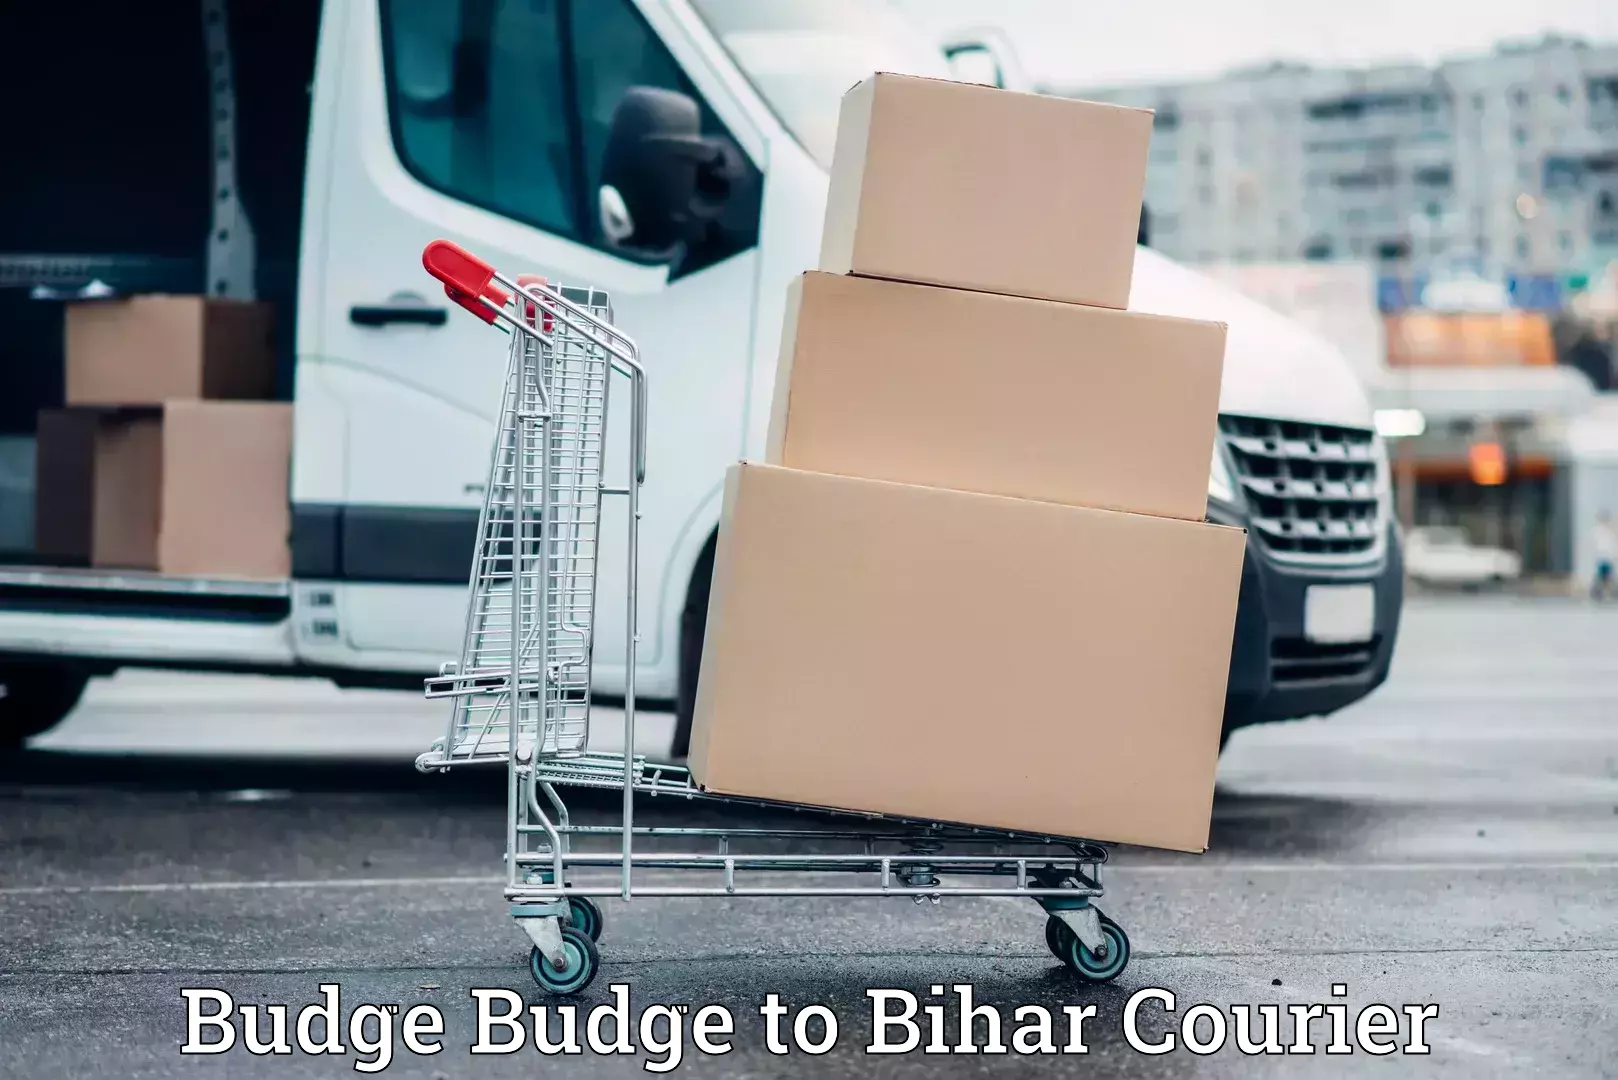 Household moving experts Budge Budge to Bihar